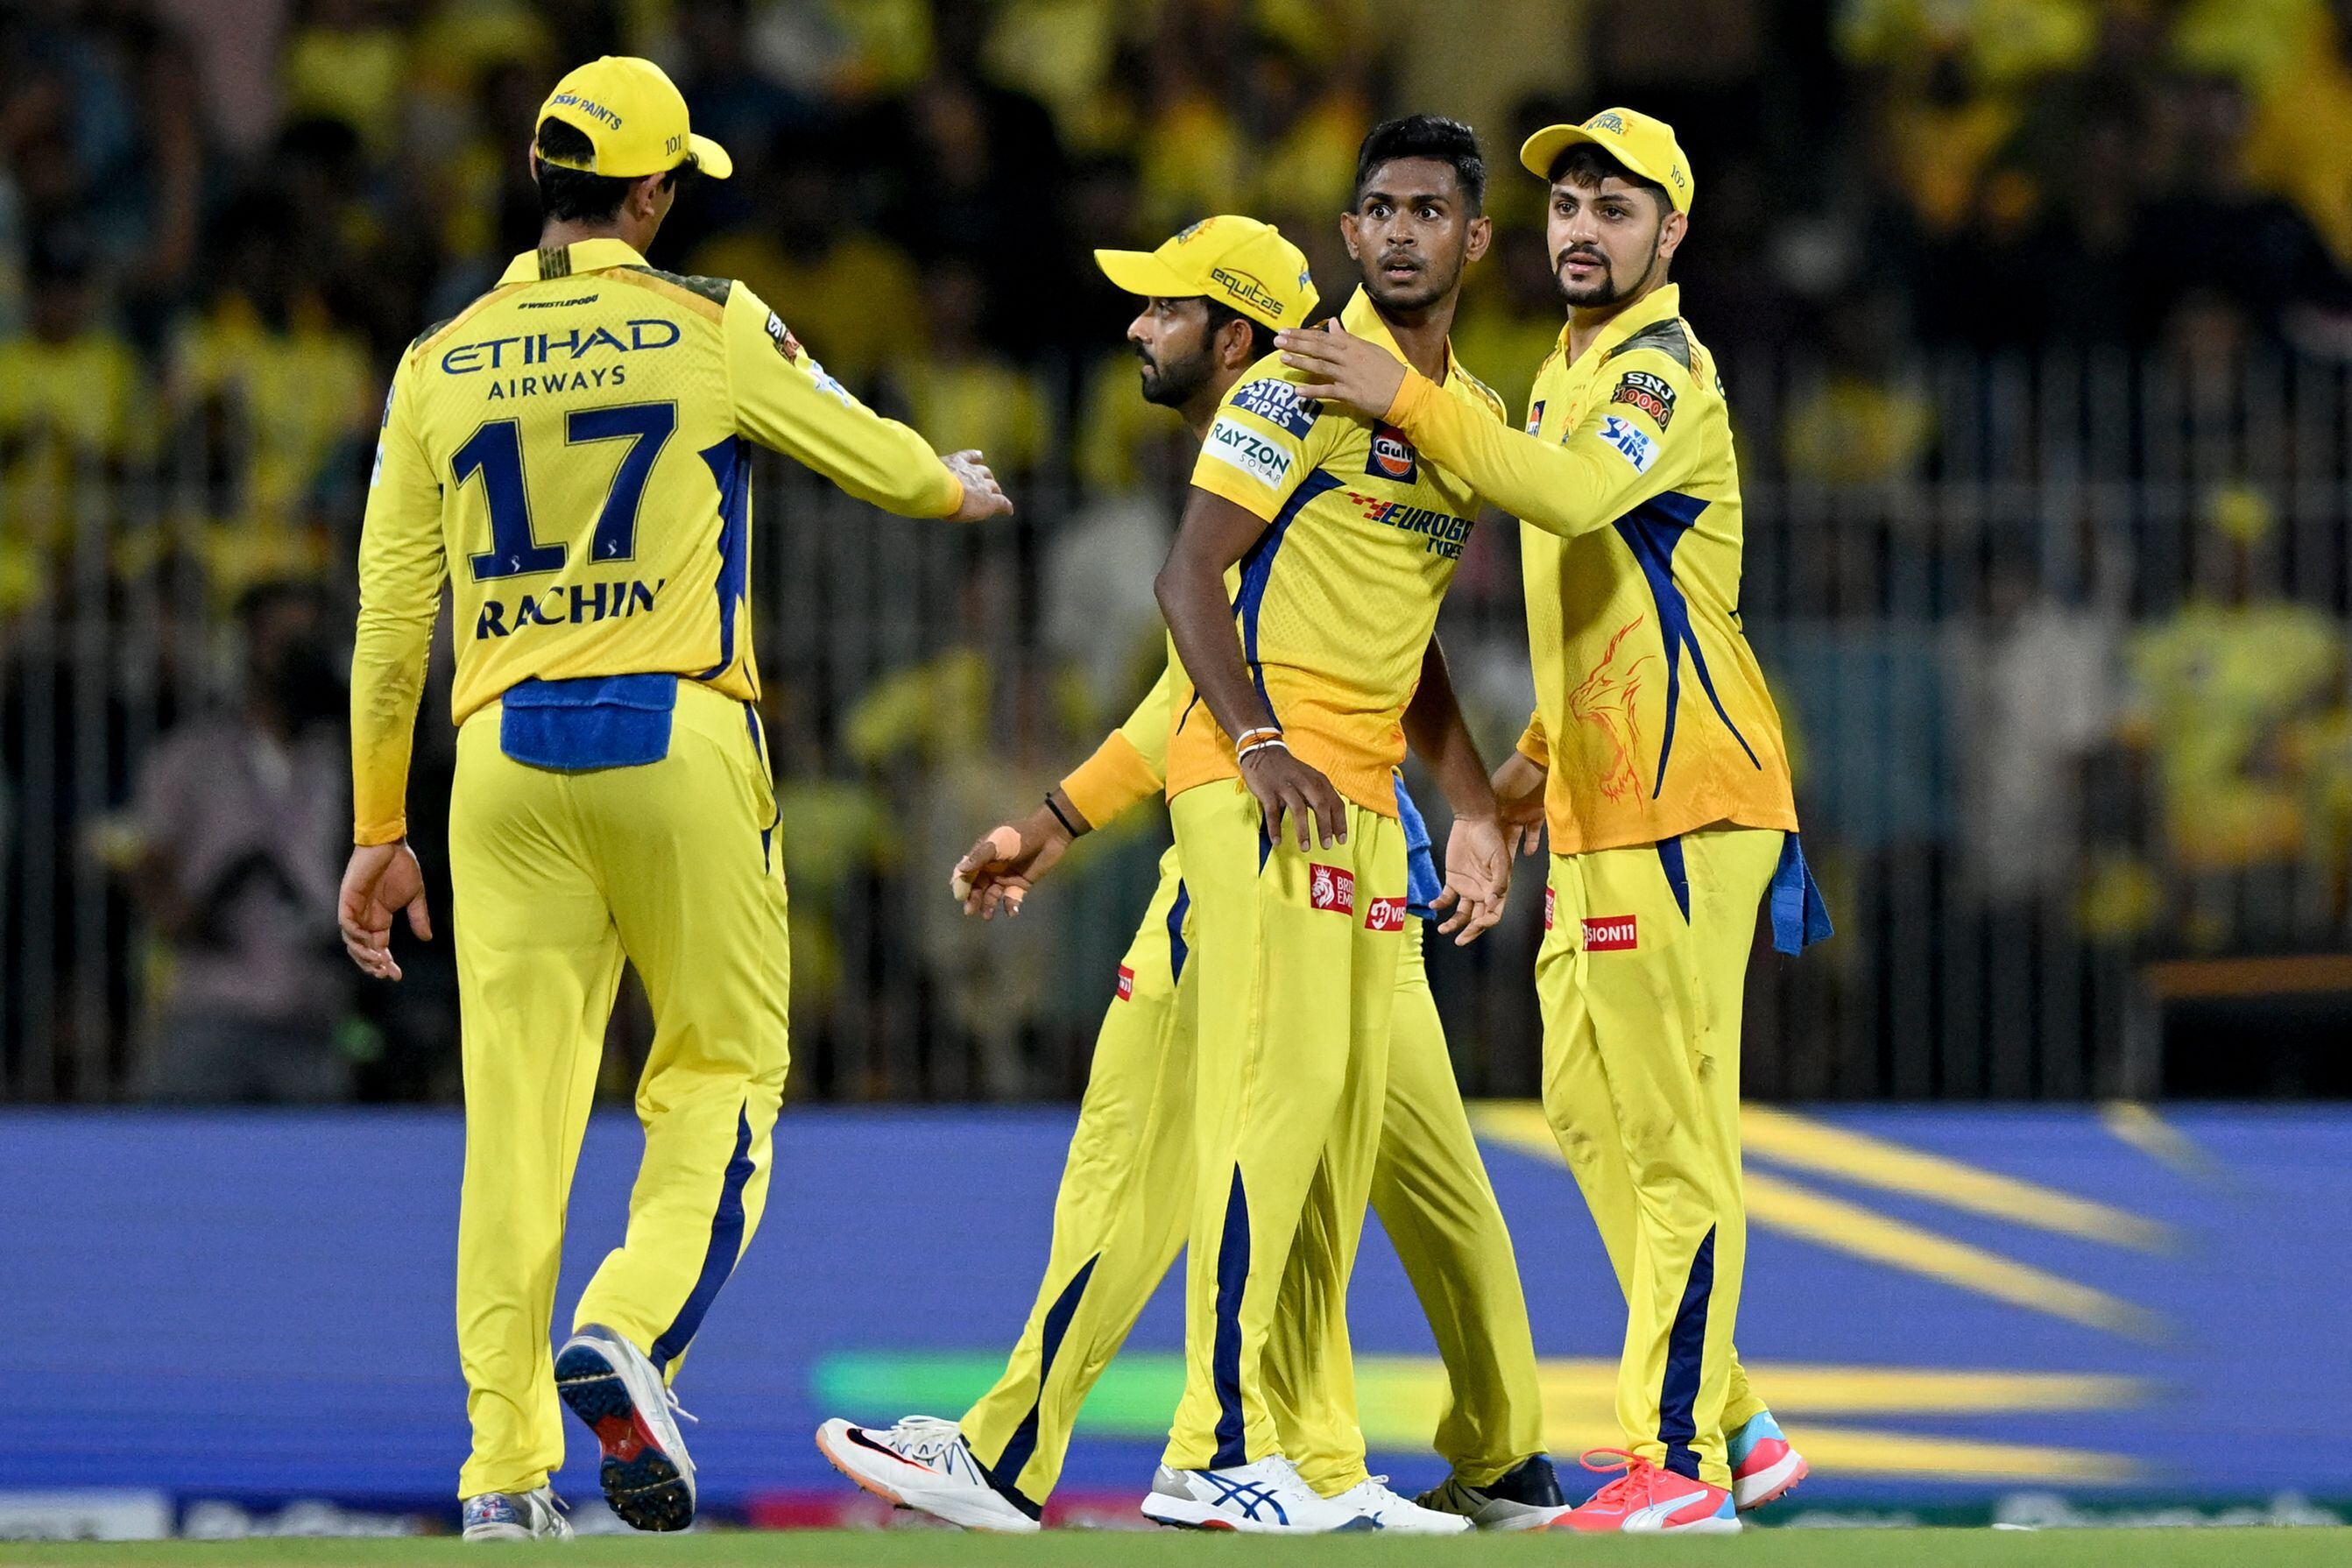 ipl talking points: india's t20 world cup dilemma, impact player woes and uncapped stars